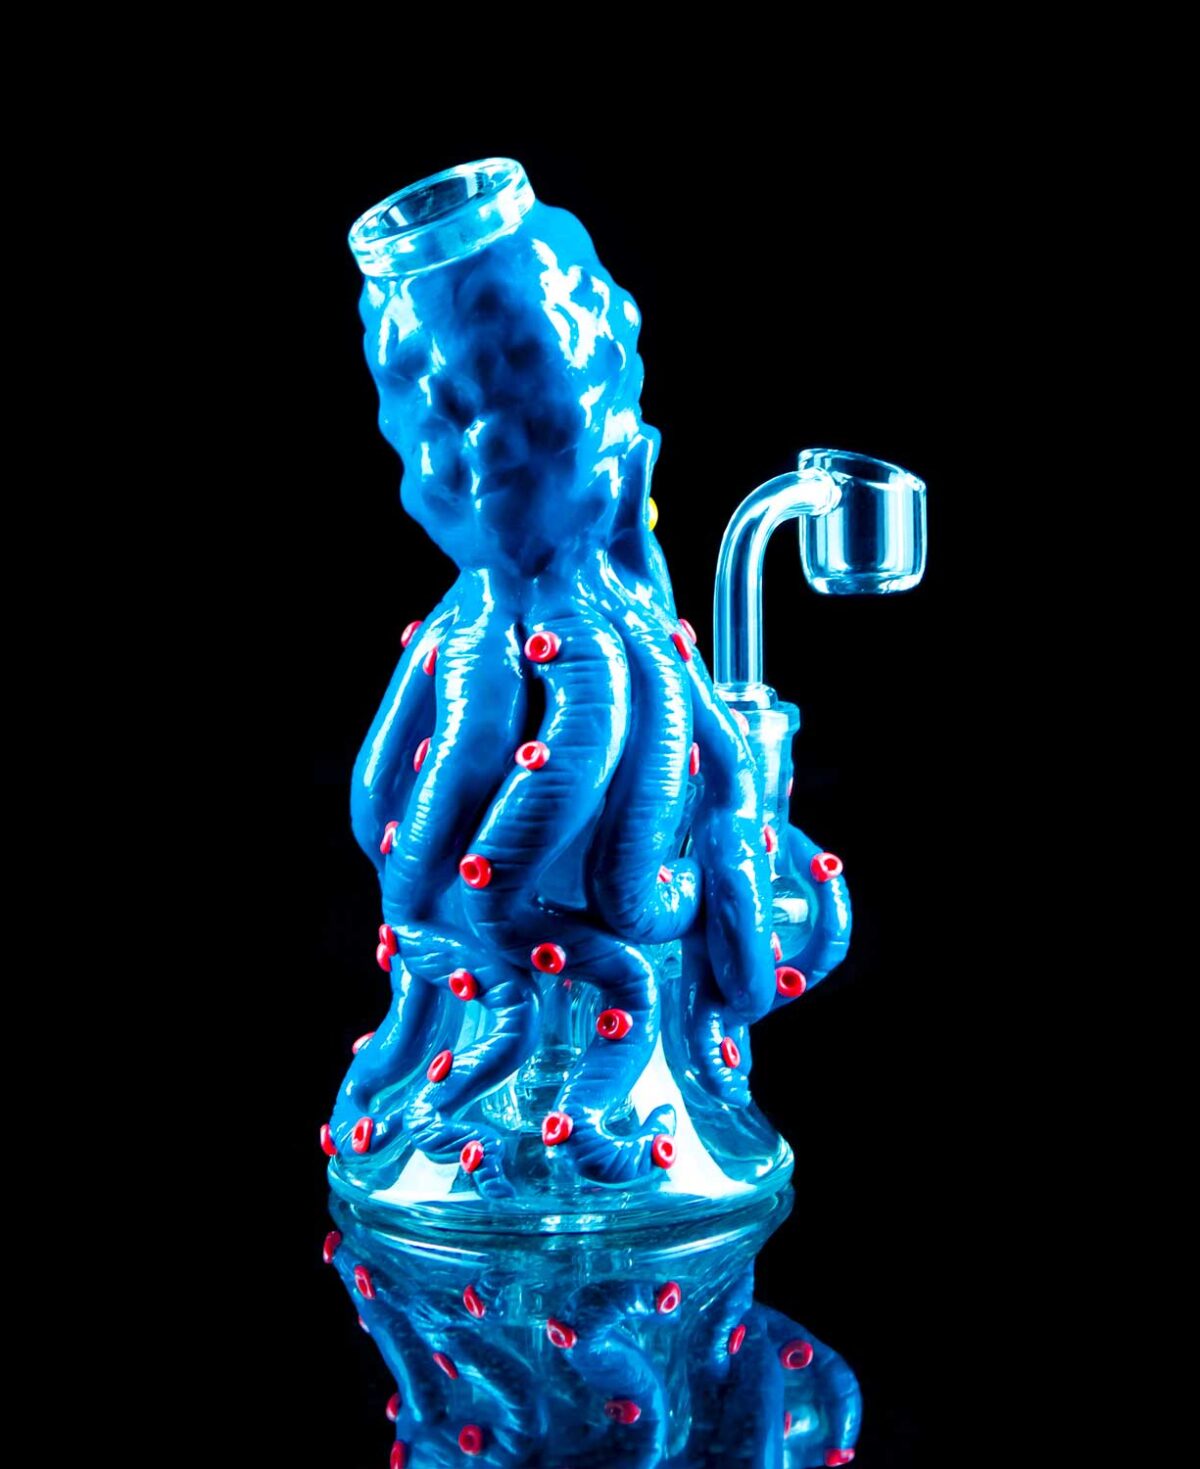 octopus rig blue with red suckers